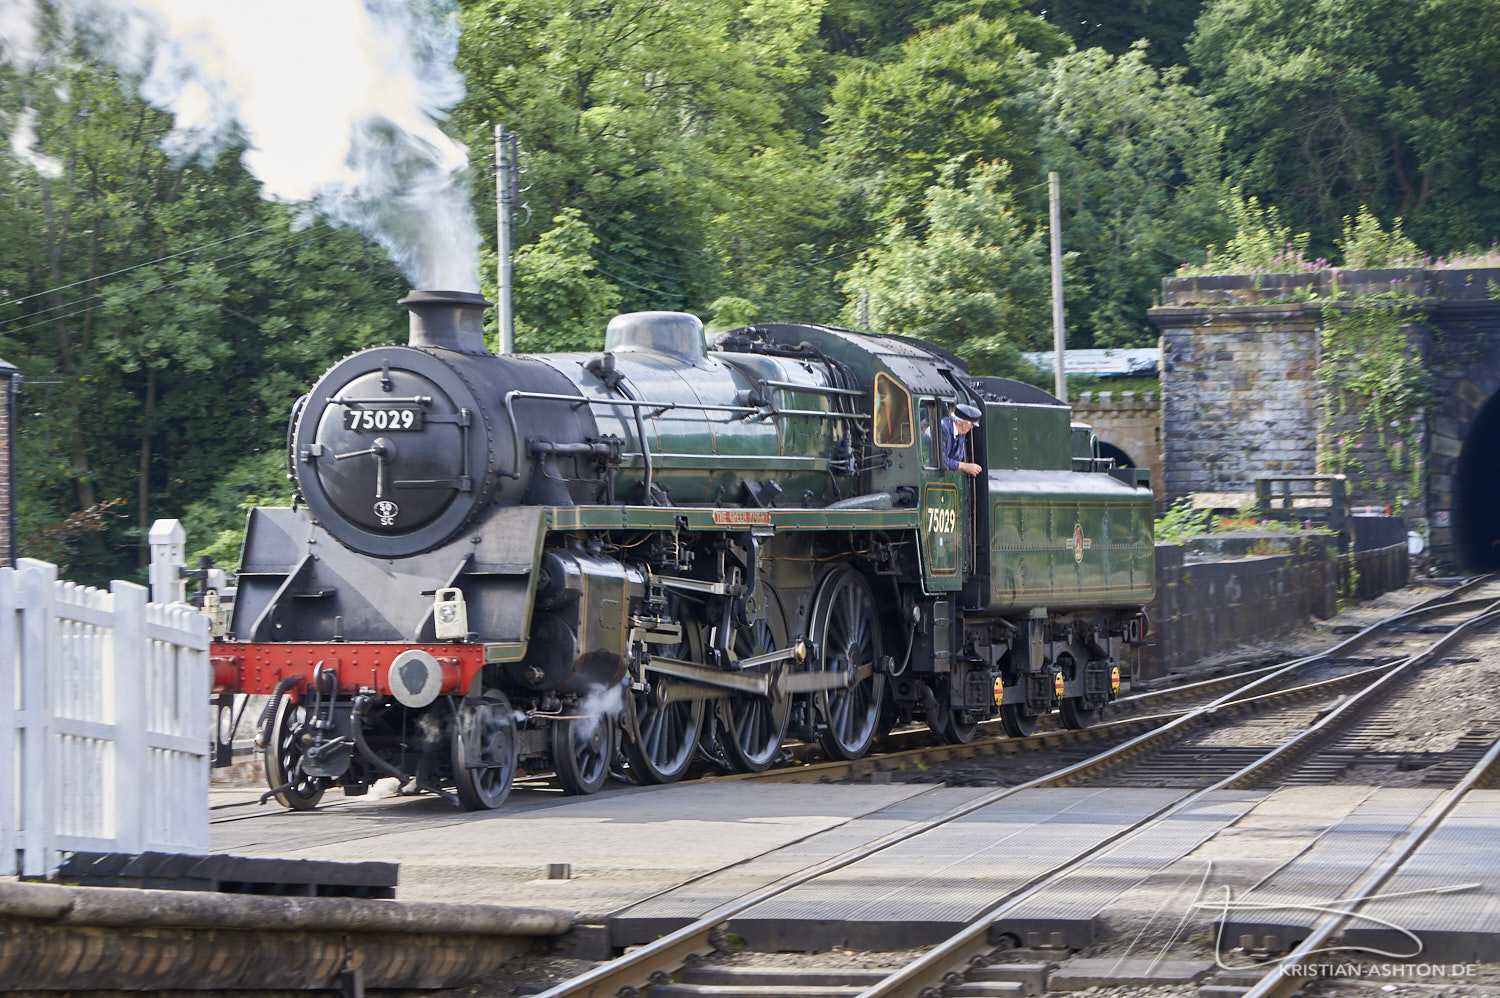 Grosmont station - North Yorkshire Moors Railway - 4-6-0 steam loco No. 75029 "The Green Knight"